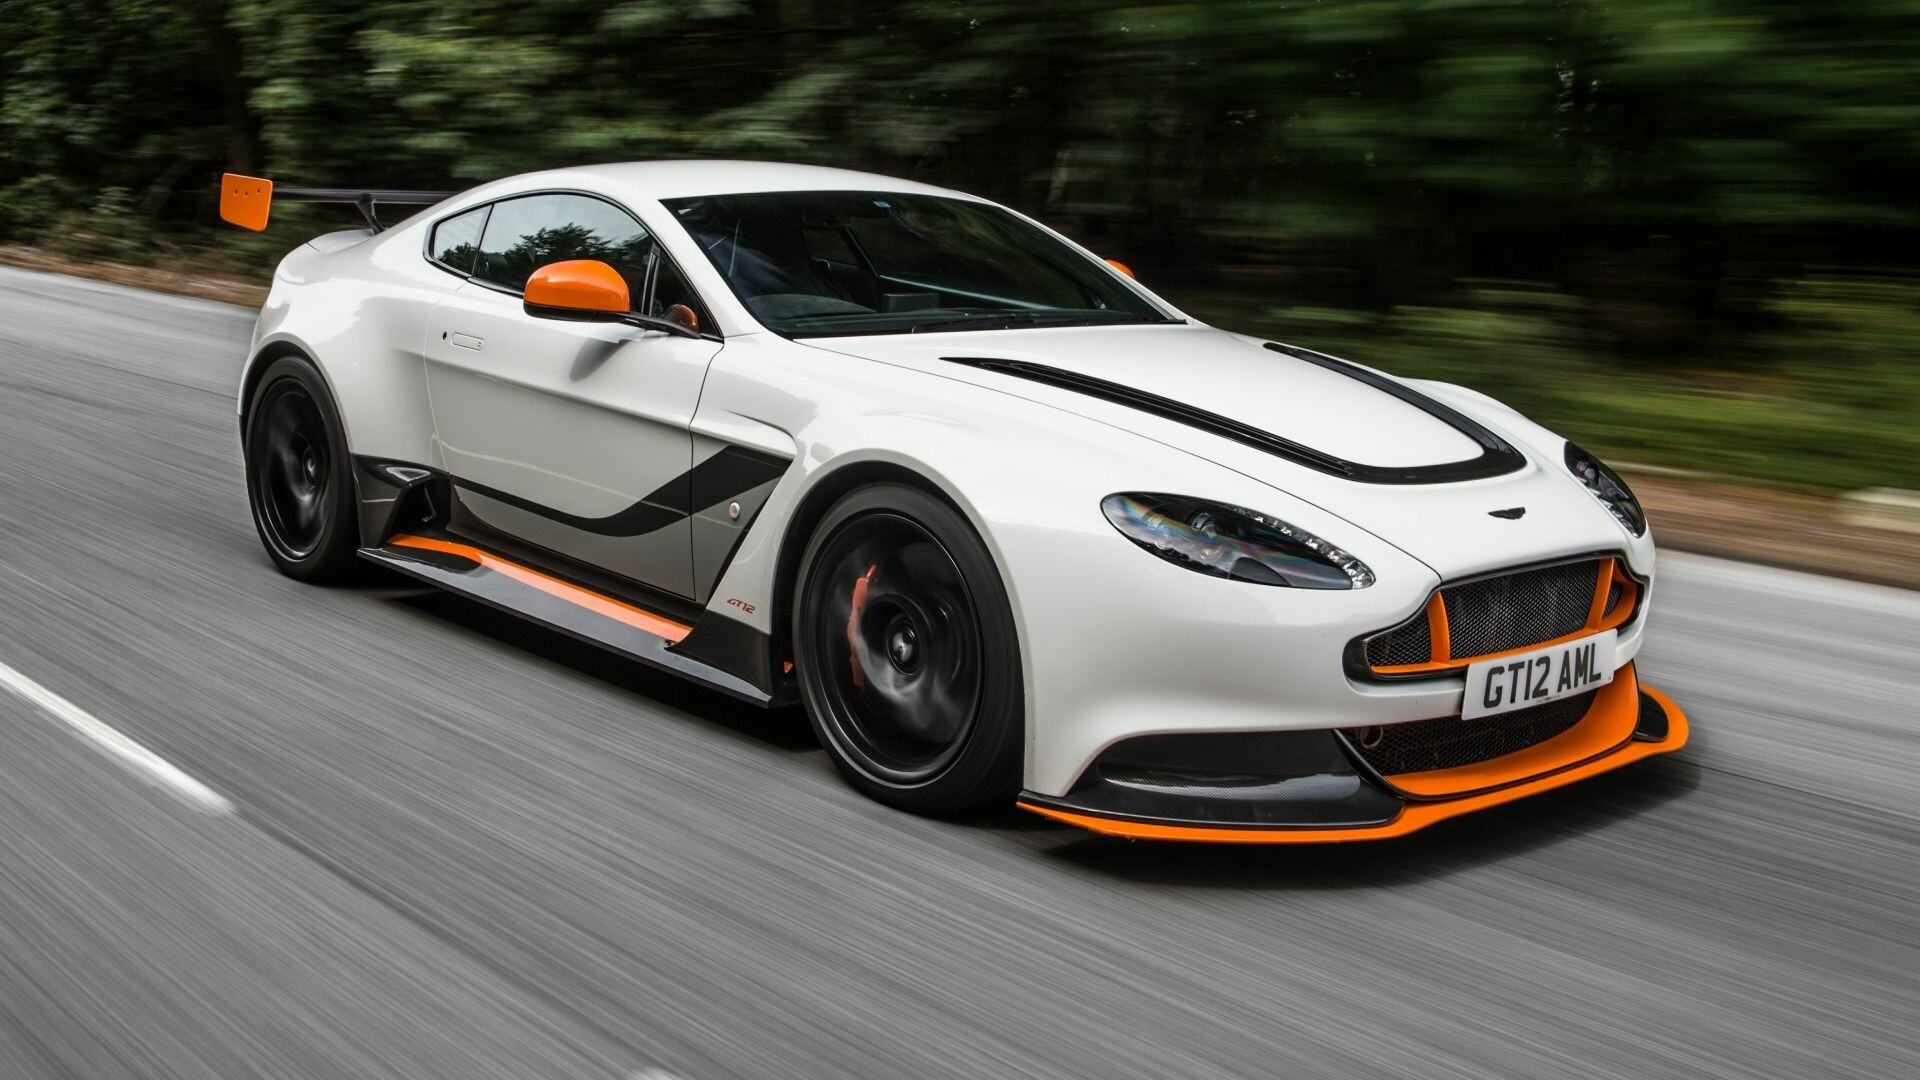 Aston Martin: British car company, Known for its ties to James Bond. 1920x1080 Full HD Wallpaper.